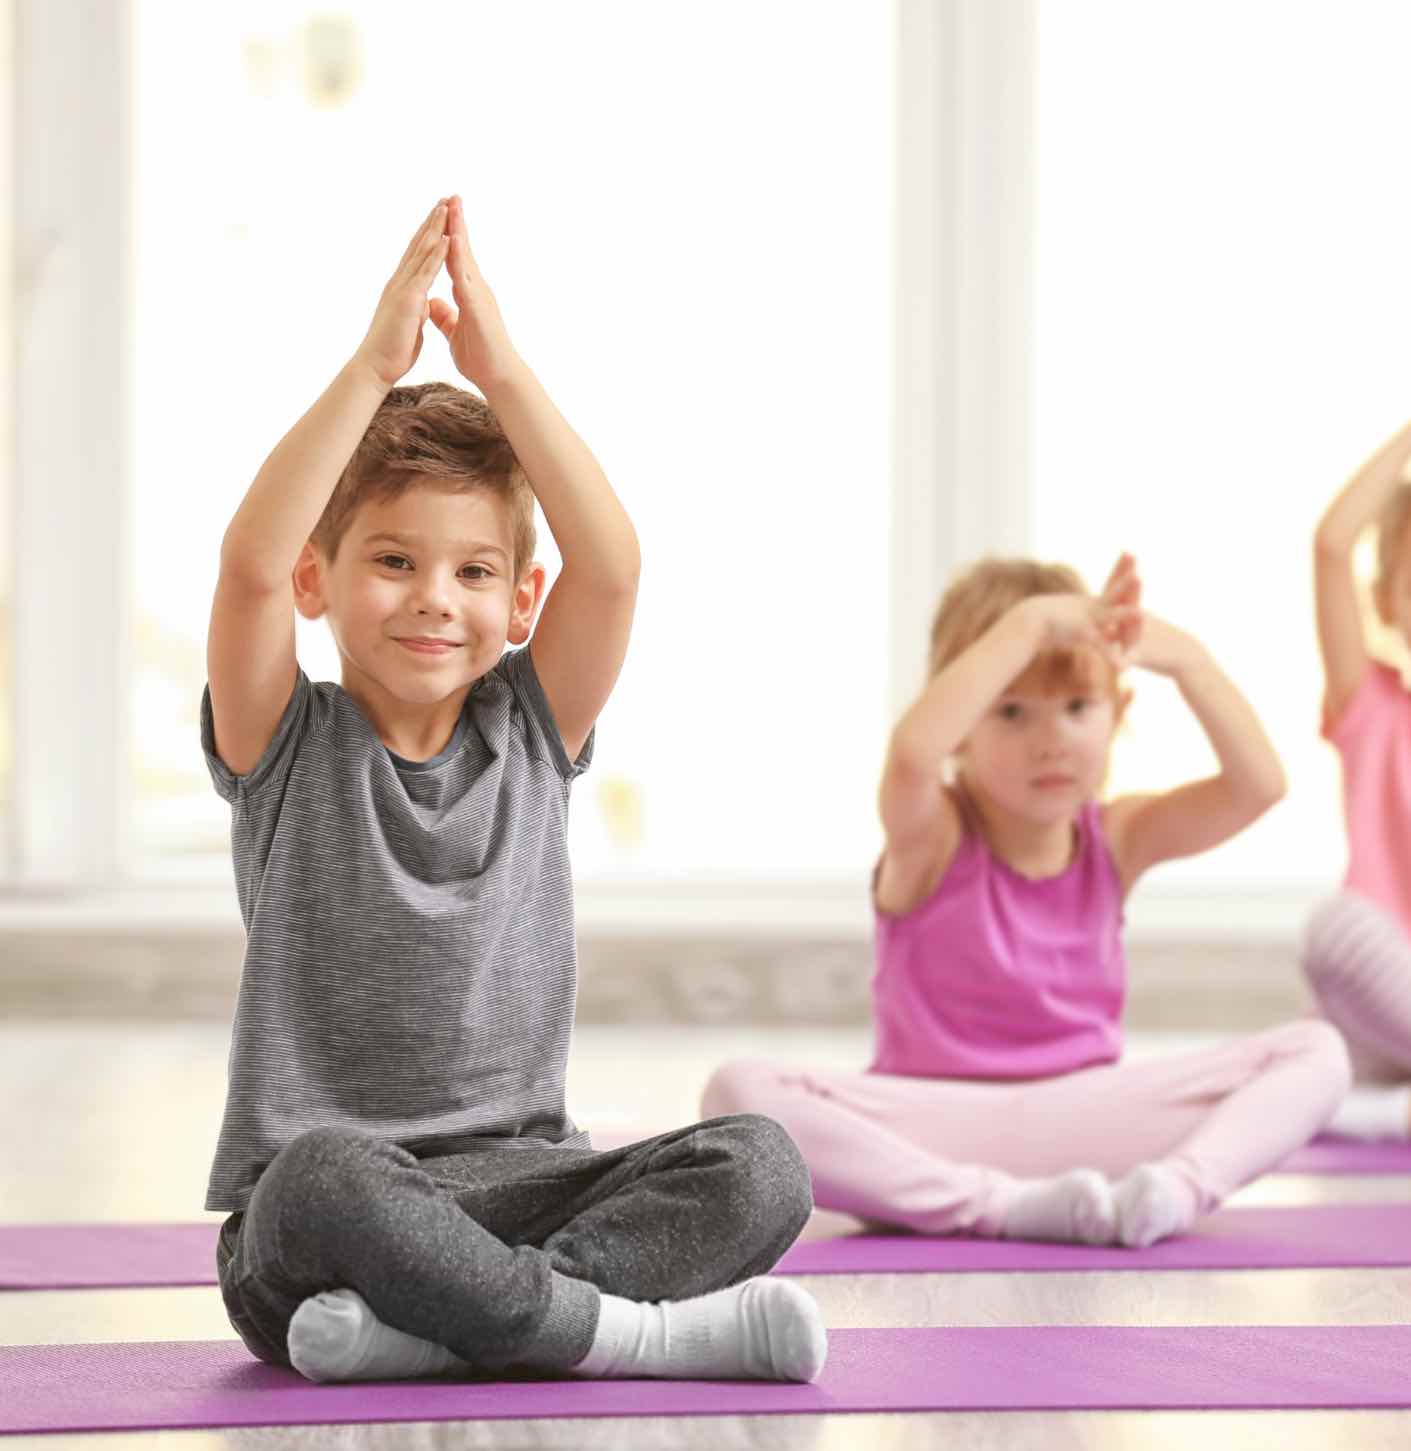 These kids enjoy practicing mindfulness through yoga - learn more tips with Romp n' Roll in Midlothian, VA!